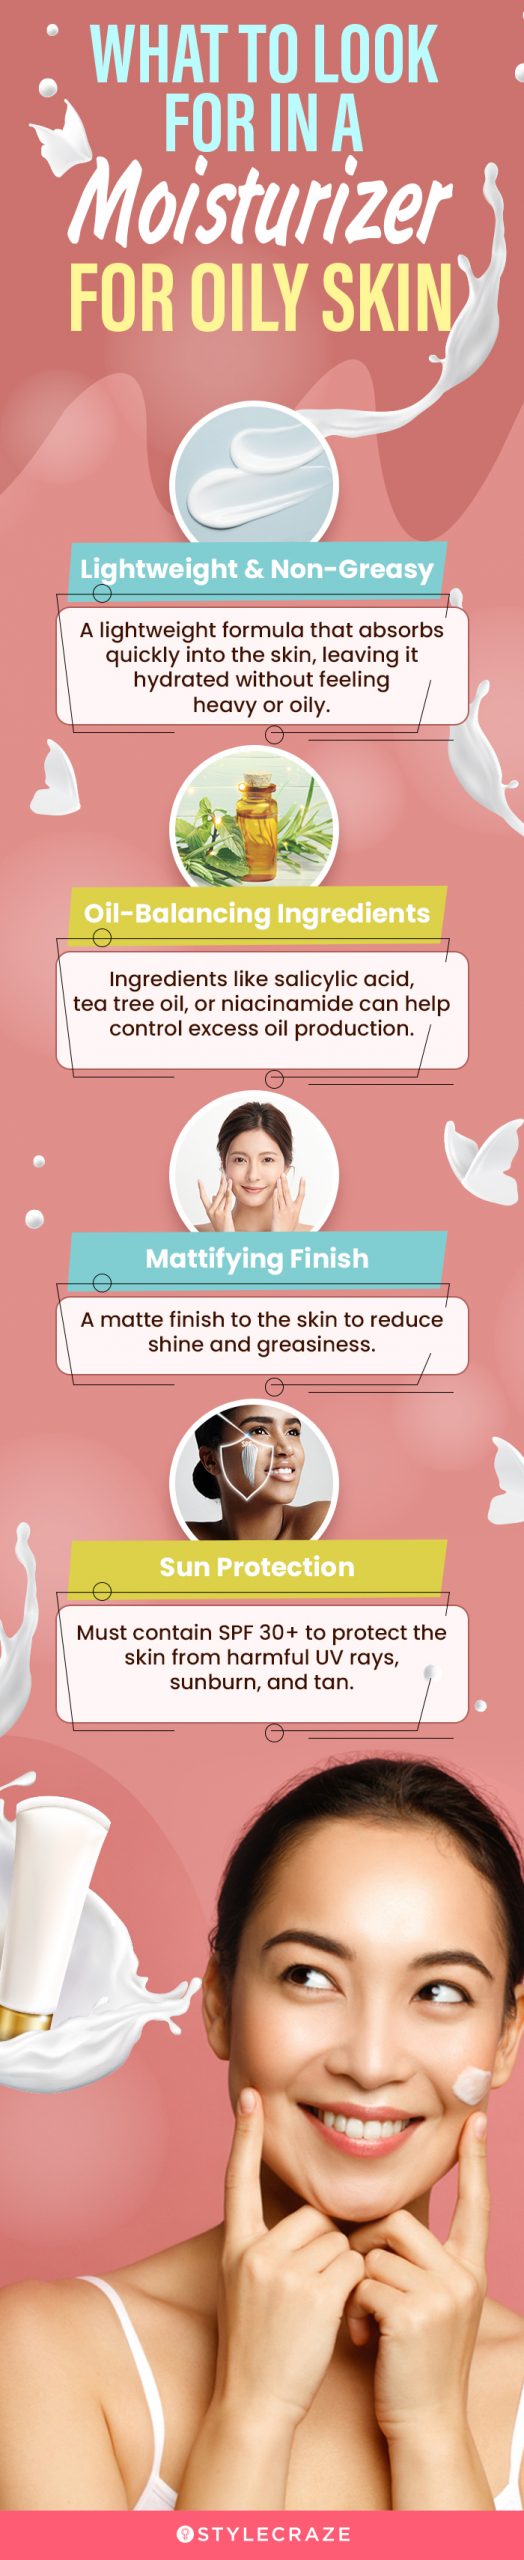 What To Look For In A Moisturizer For Oily Skin (infographic)